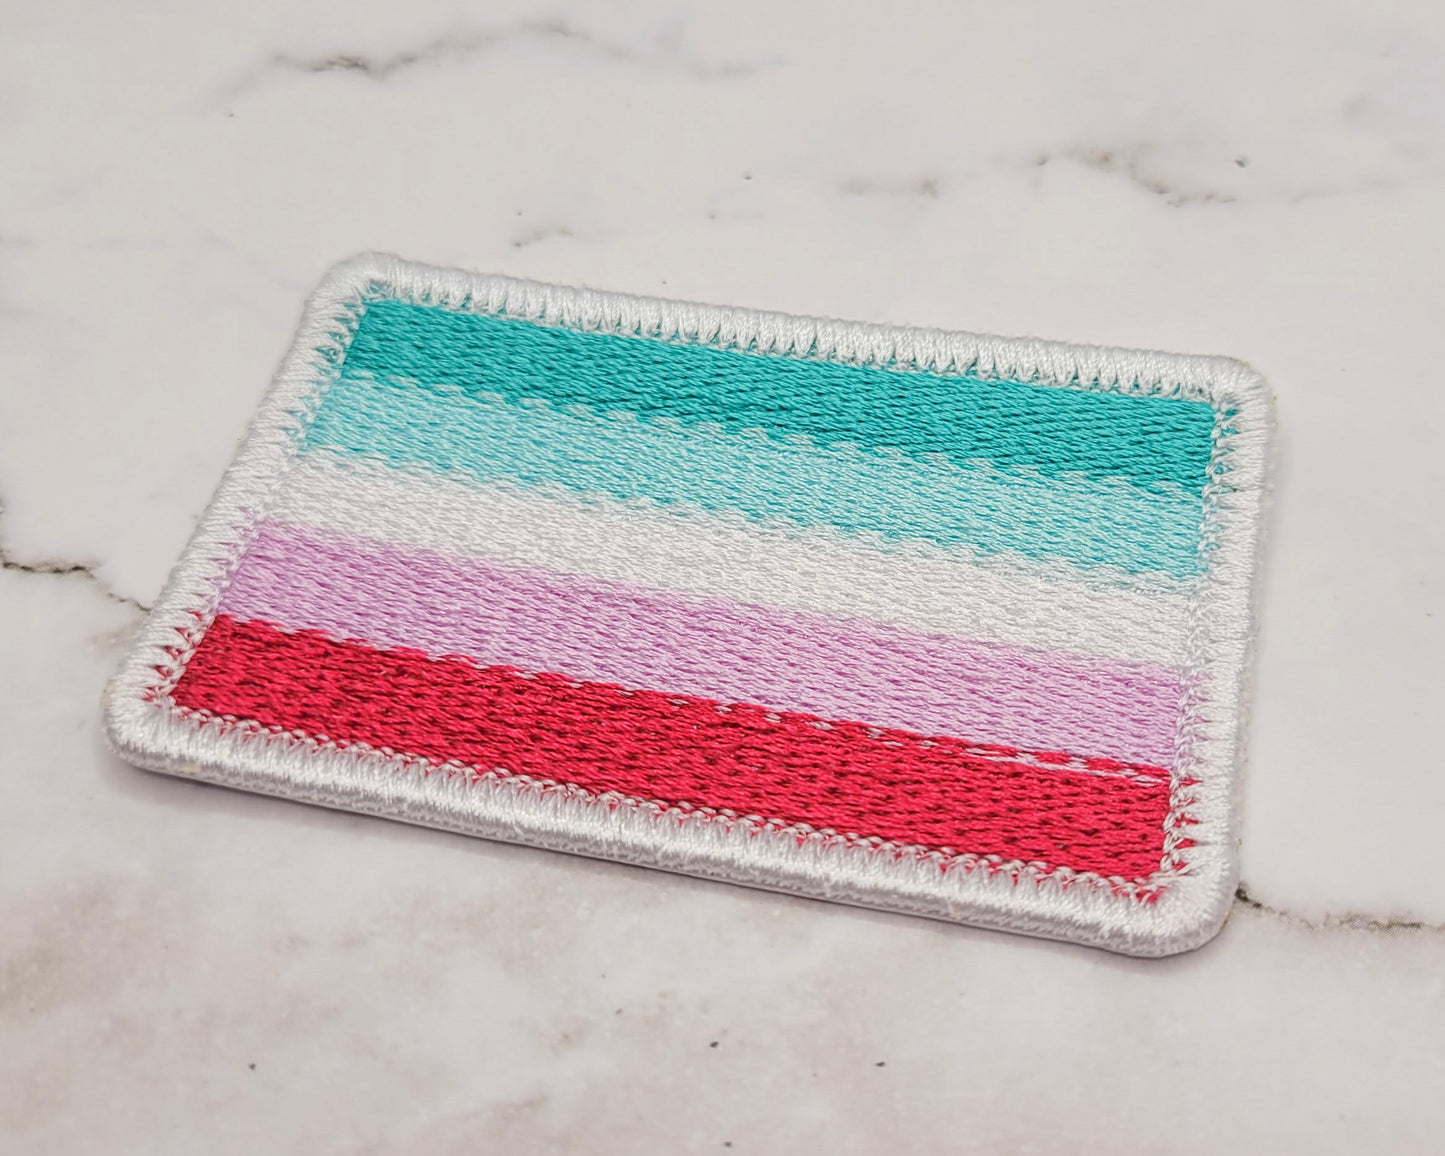 Abrosexual Pride Flag Patch & Pinback Button